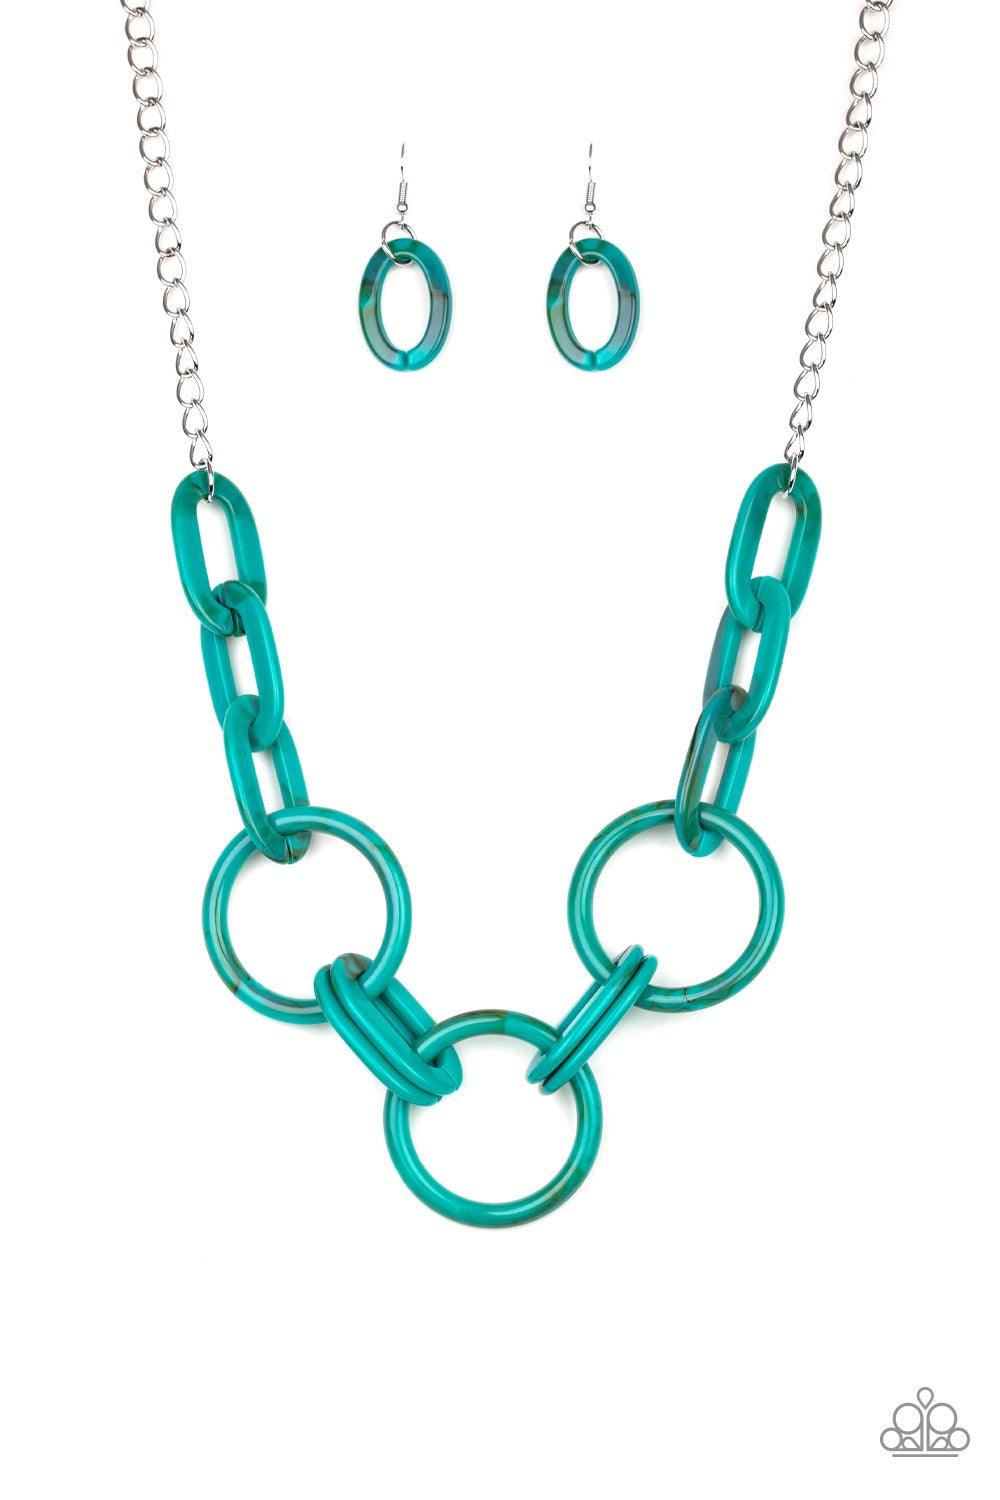 Paparazzi Accessories Turn Up The Heat - Blue Suspended from a shimmery silver chain, a collision of acrylic blue links connect below the collar in a statement-making fashion. Features an adjustable clasp closure. Jewelry